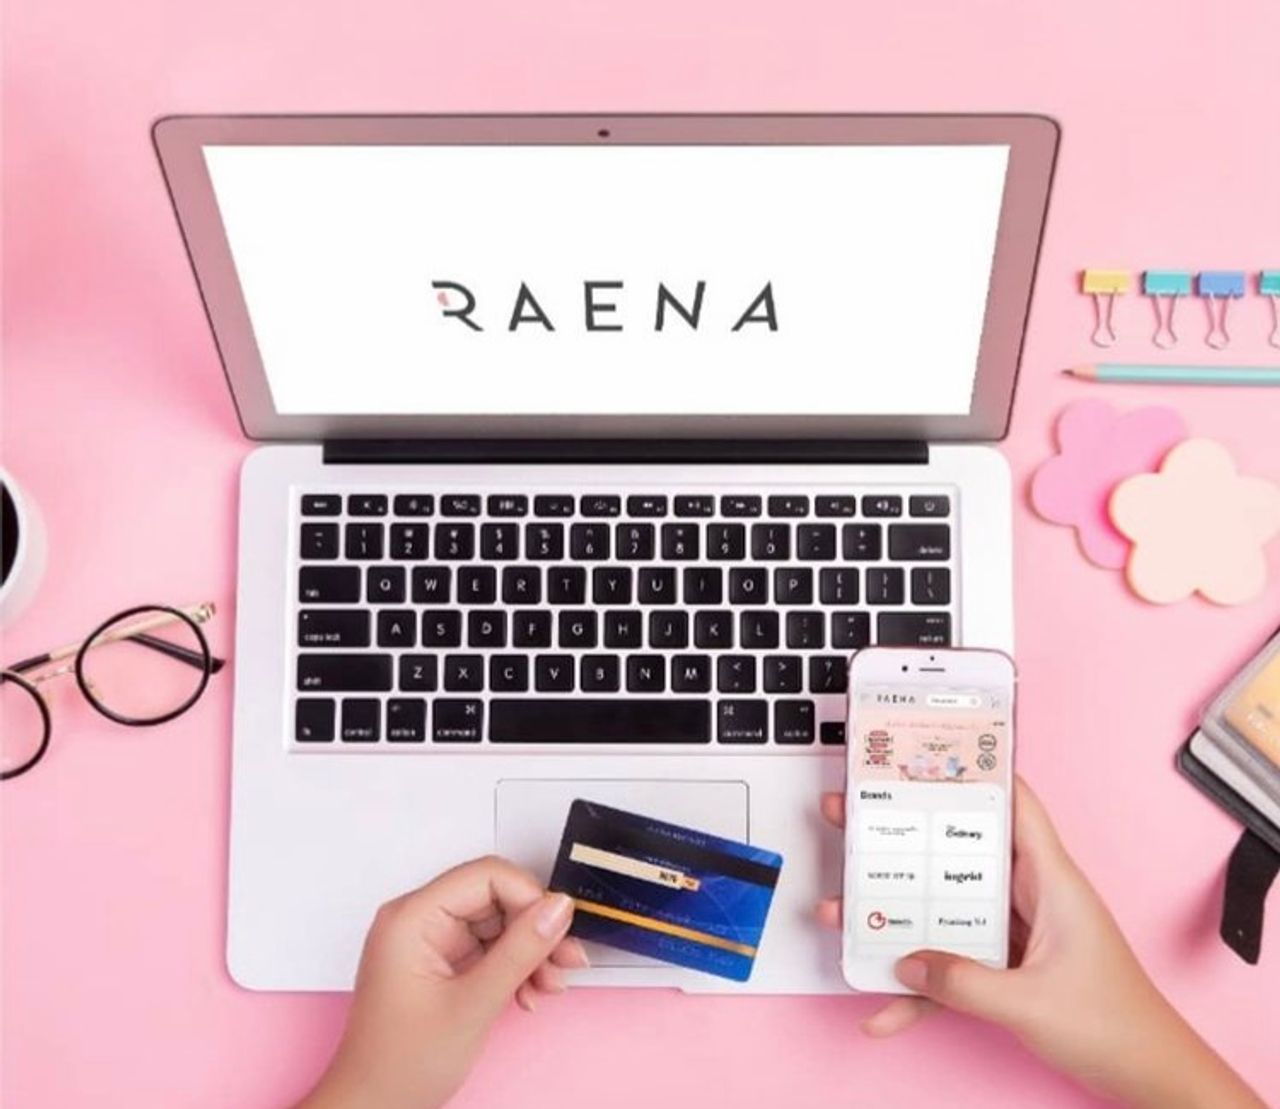 Raena is an entry point for dropshipping beauty products in Indonesia | Startup Stories